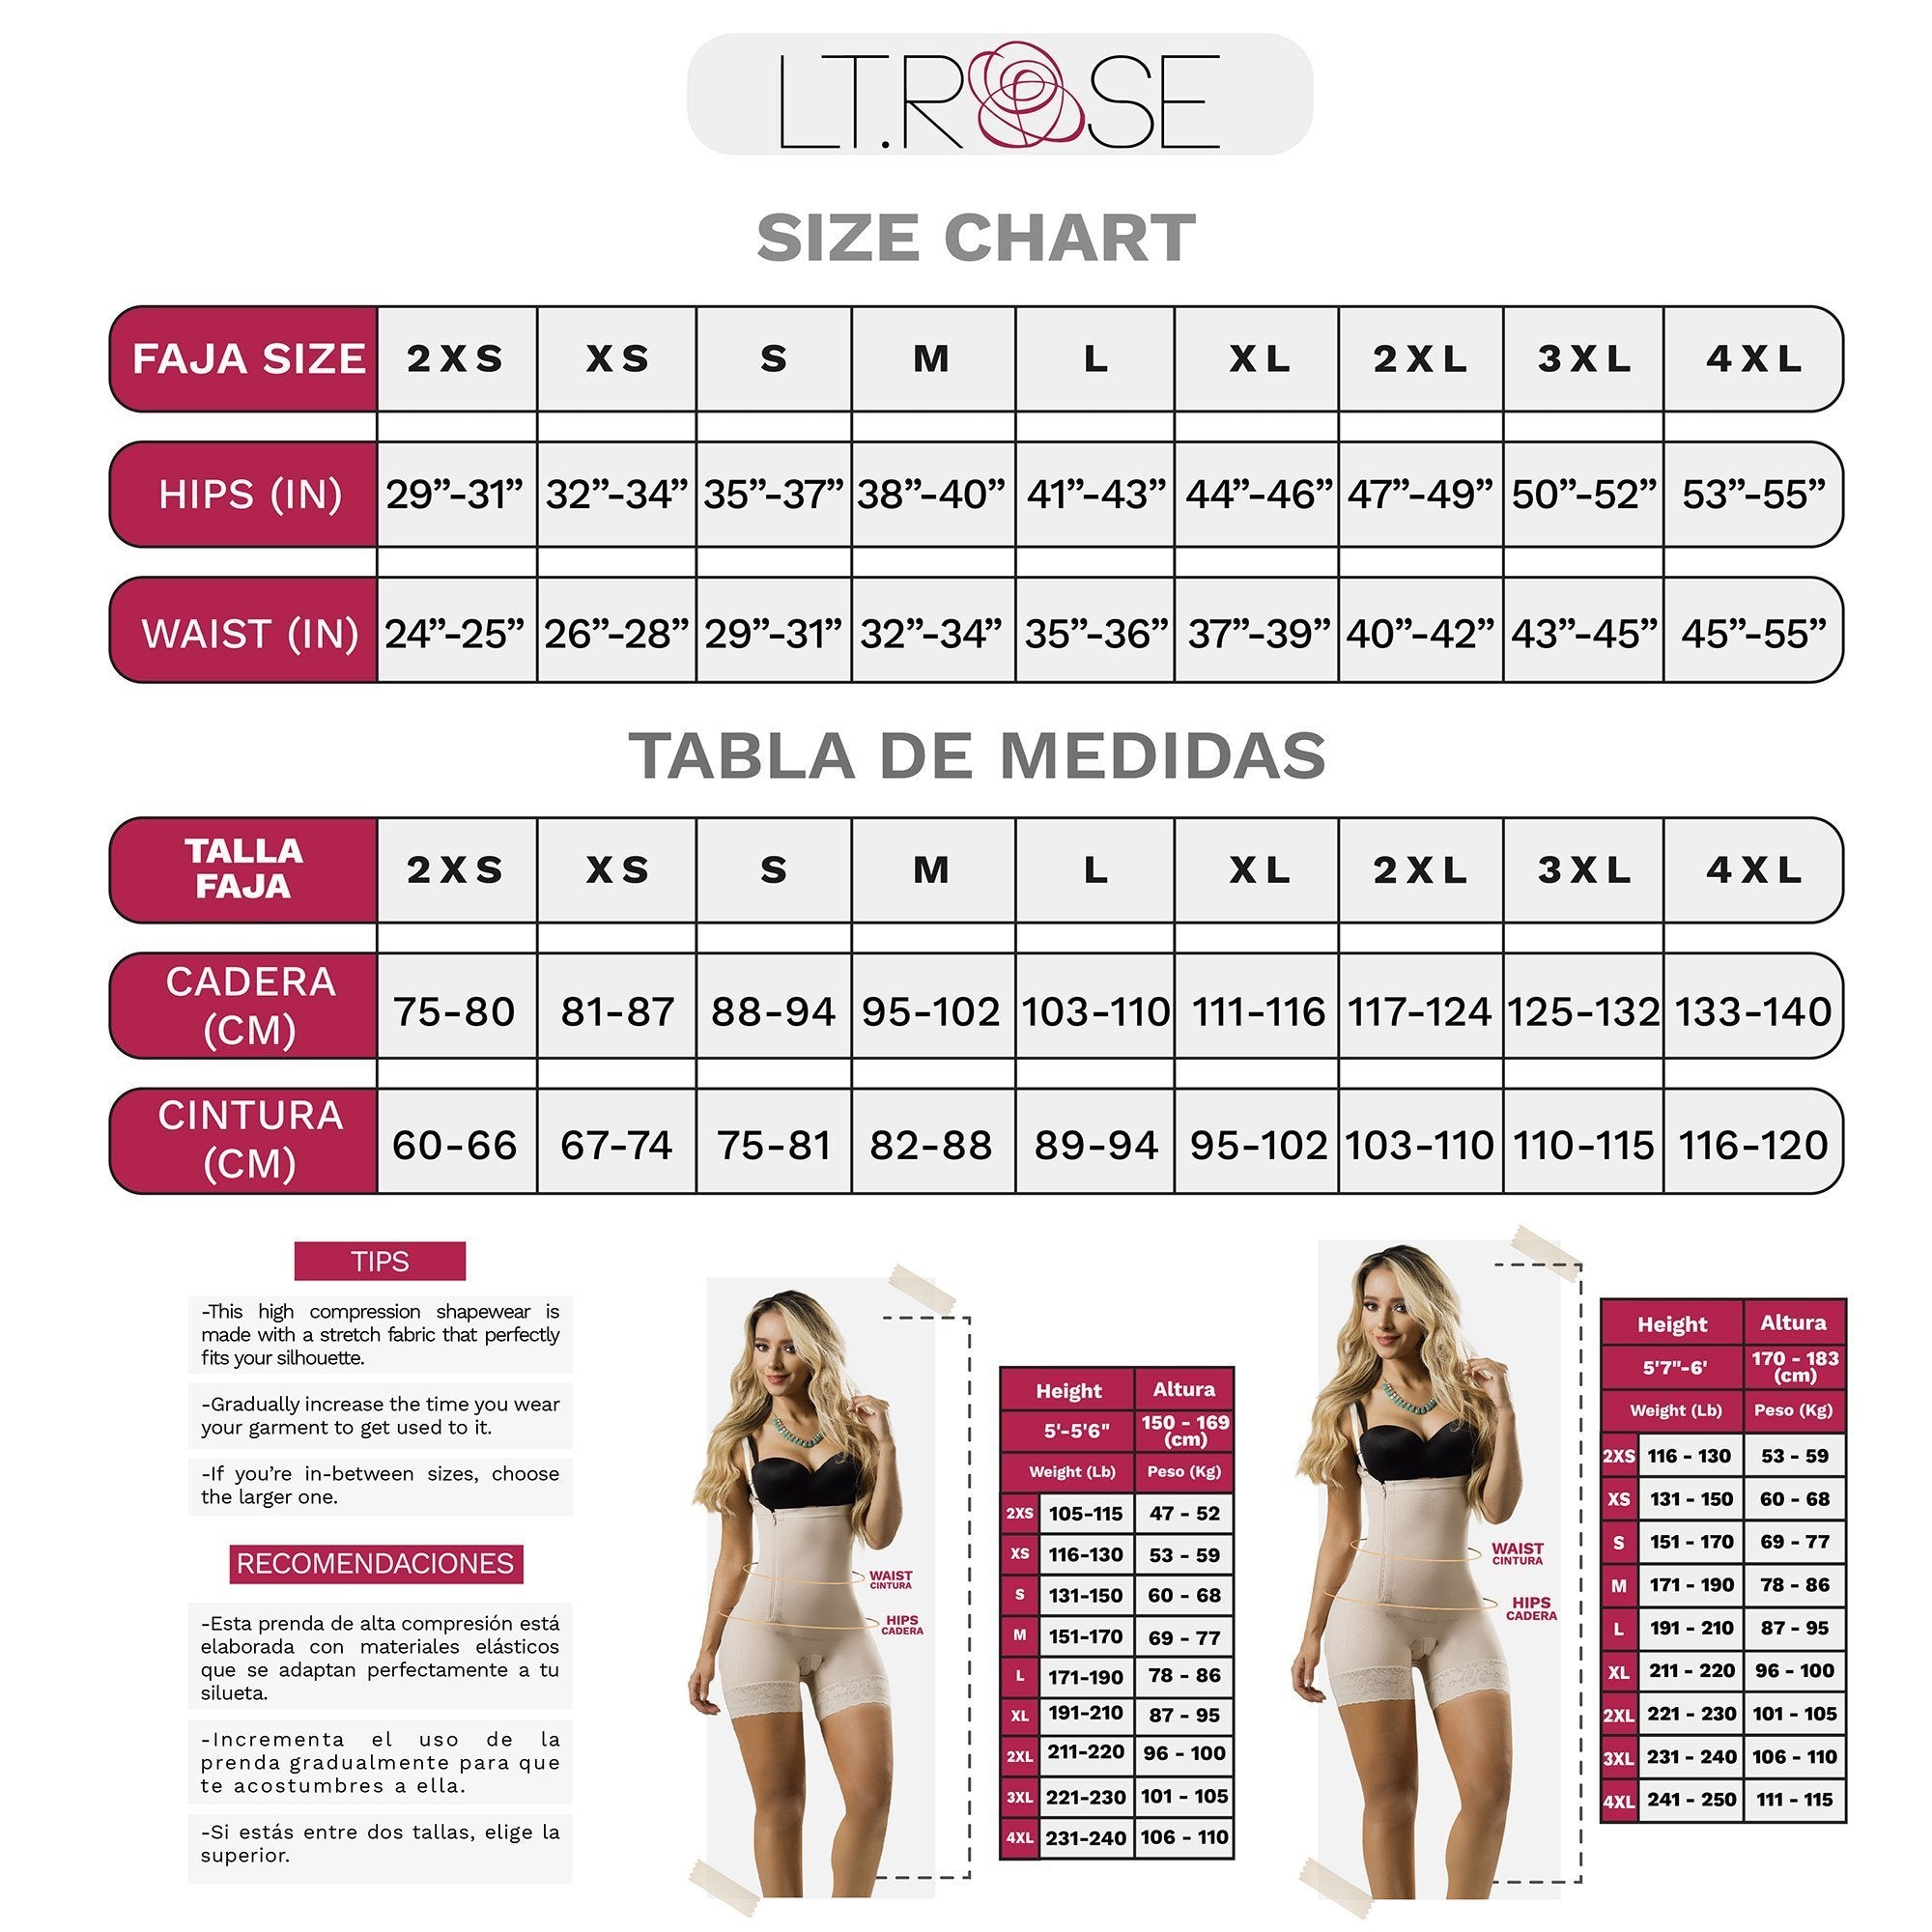 LATY ROSE 21113 Open Bust Mid Thighs Butt-Lifting Girdle with Adjustable Straps - New England Supplier